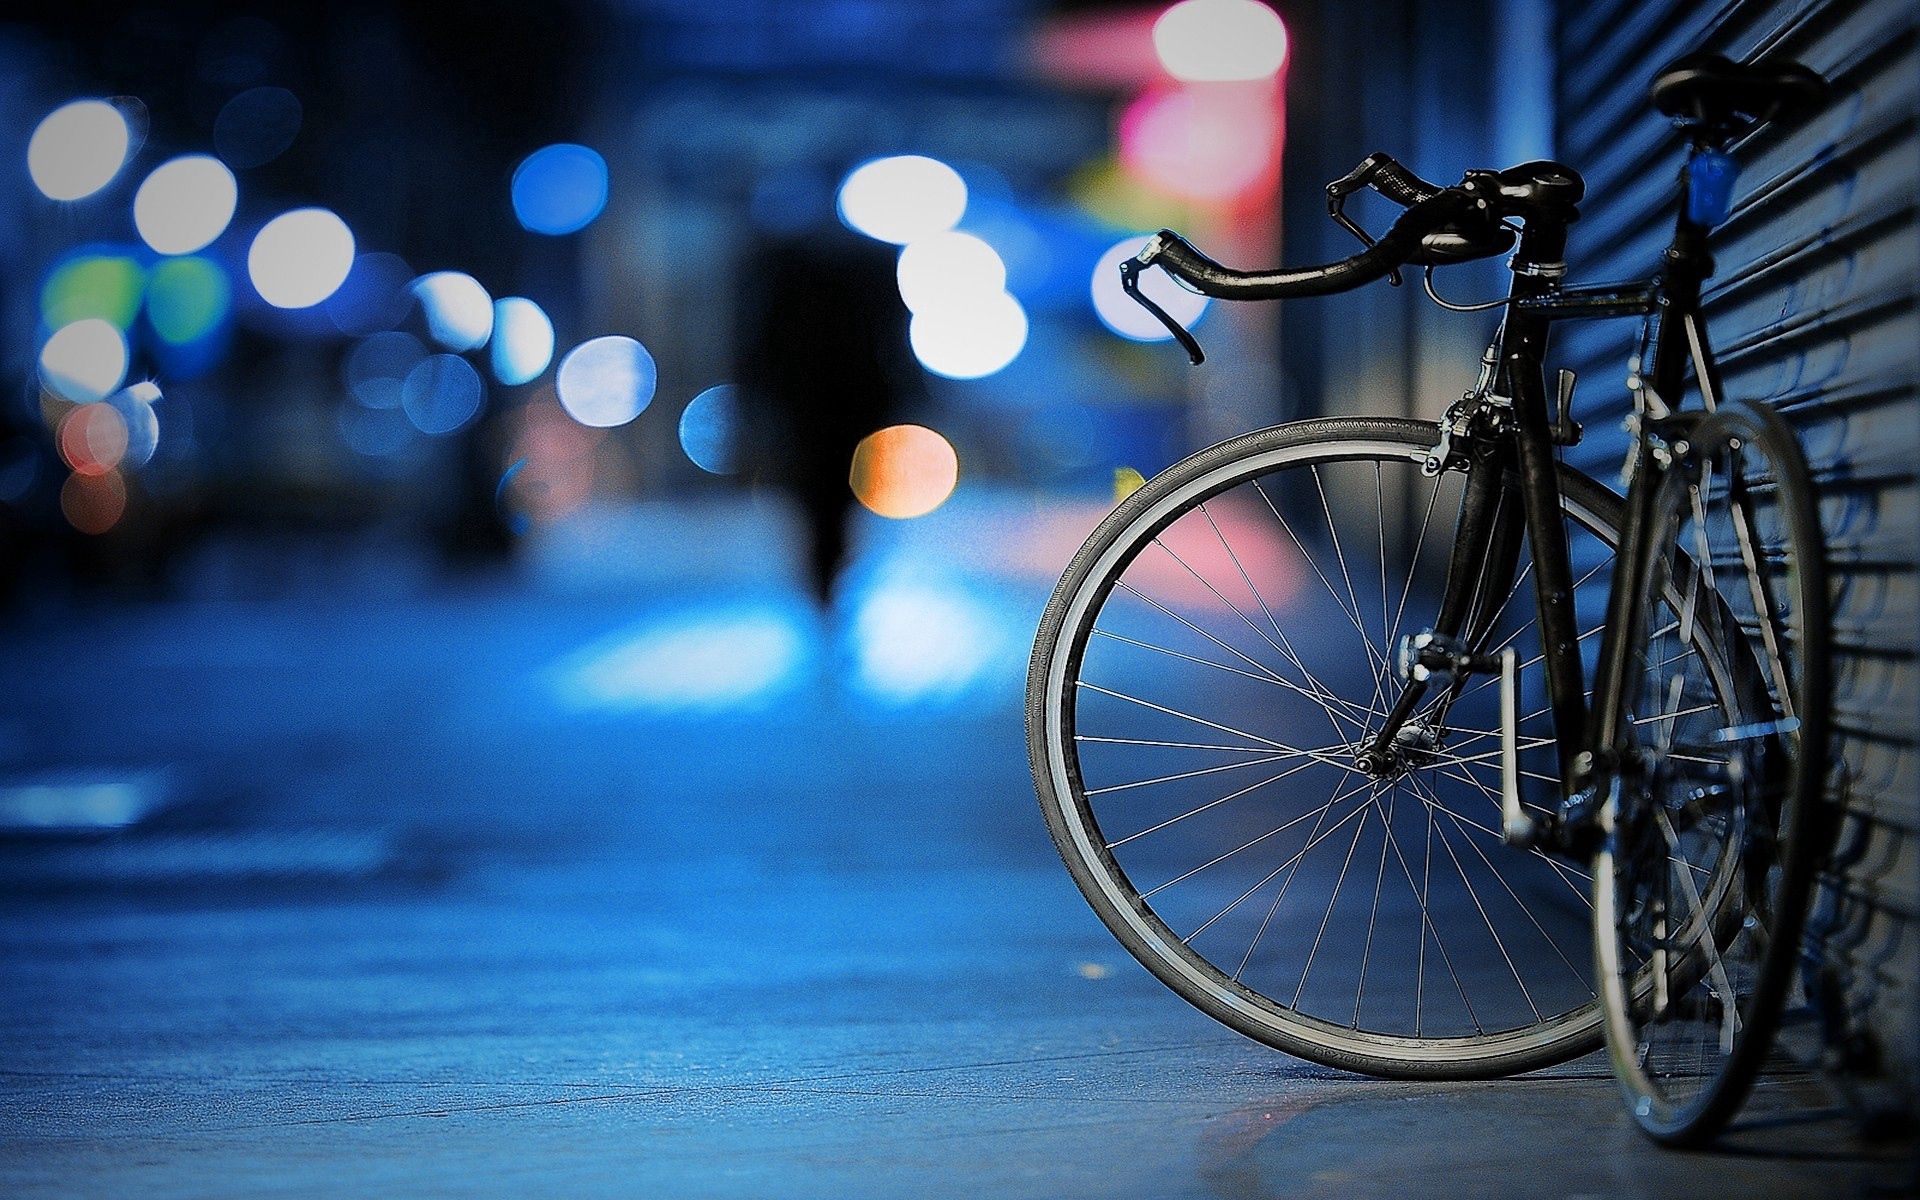 bicycle, miscellanea, miscellaneous, wall, evening, street